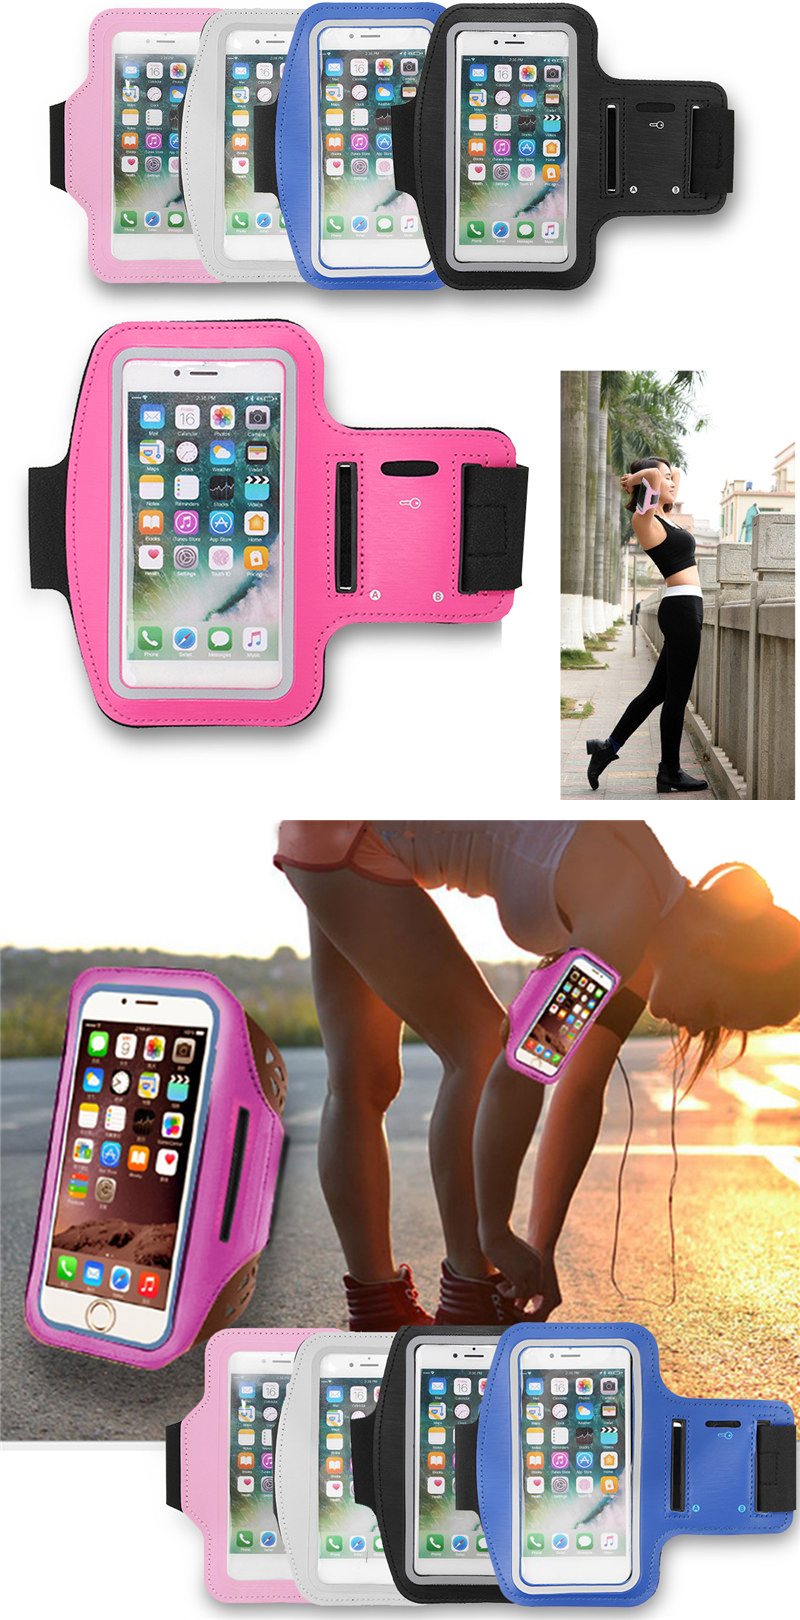 IPReereg-Waterproof-Sports-Armband-Case-Cover-Running-Gym-Touch-Screen-Holder-Pouch-for-iPhone-7-1195593-10